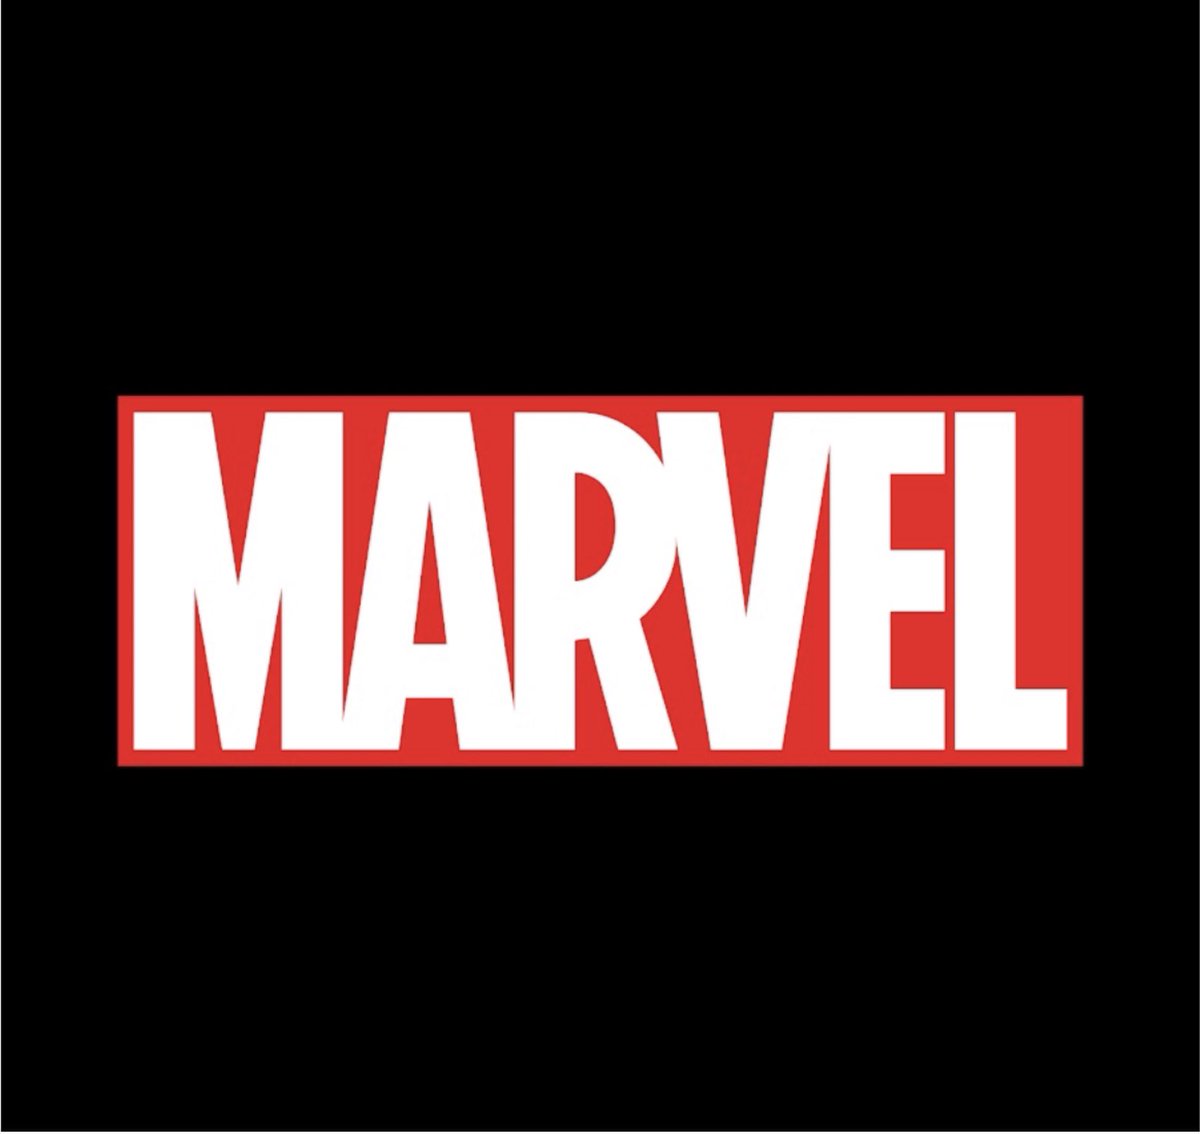 What’s your favorite trailer from marvel?